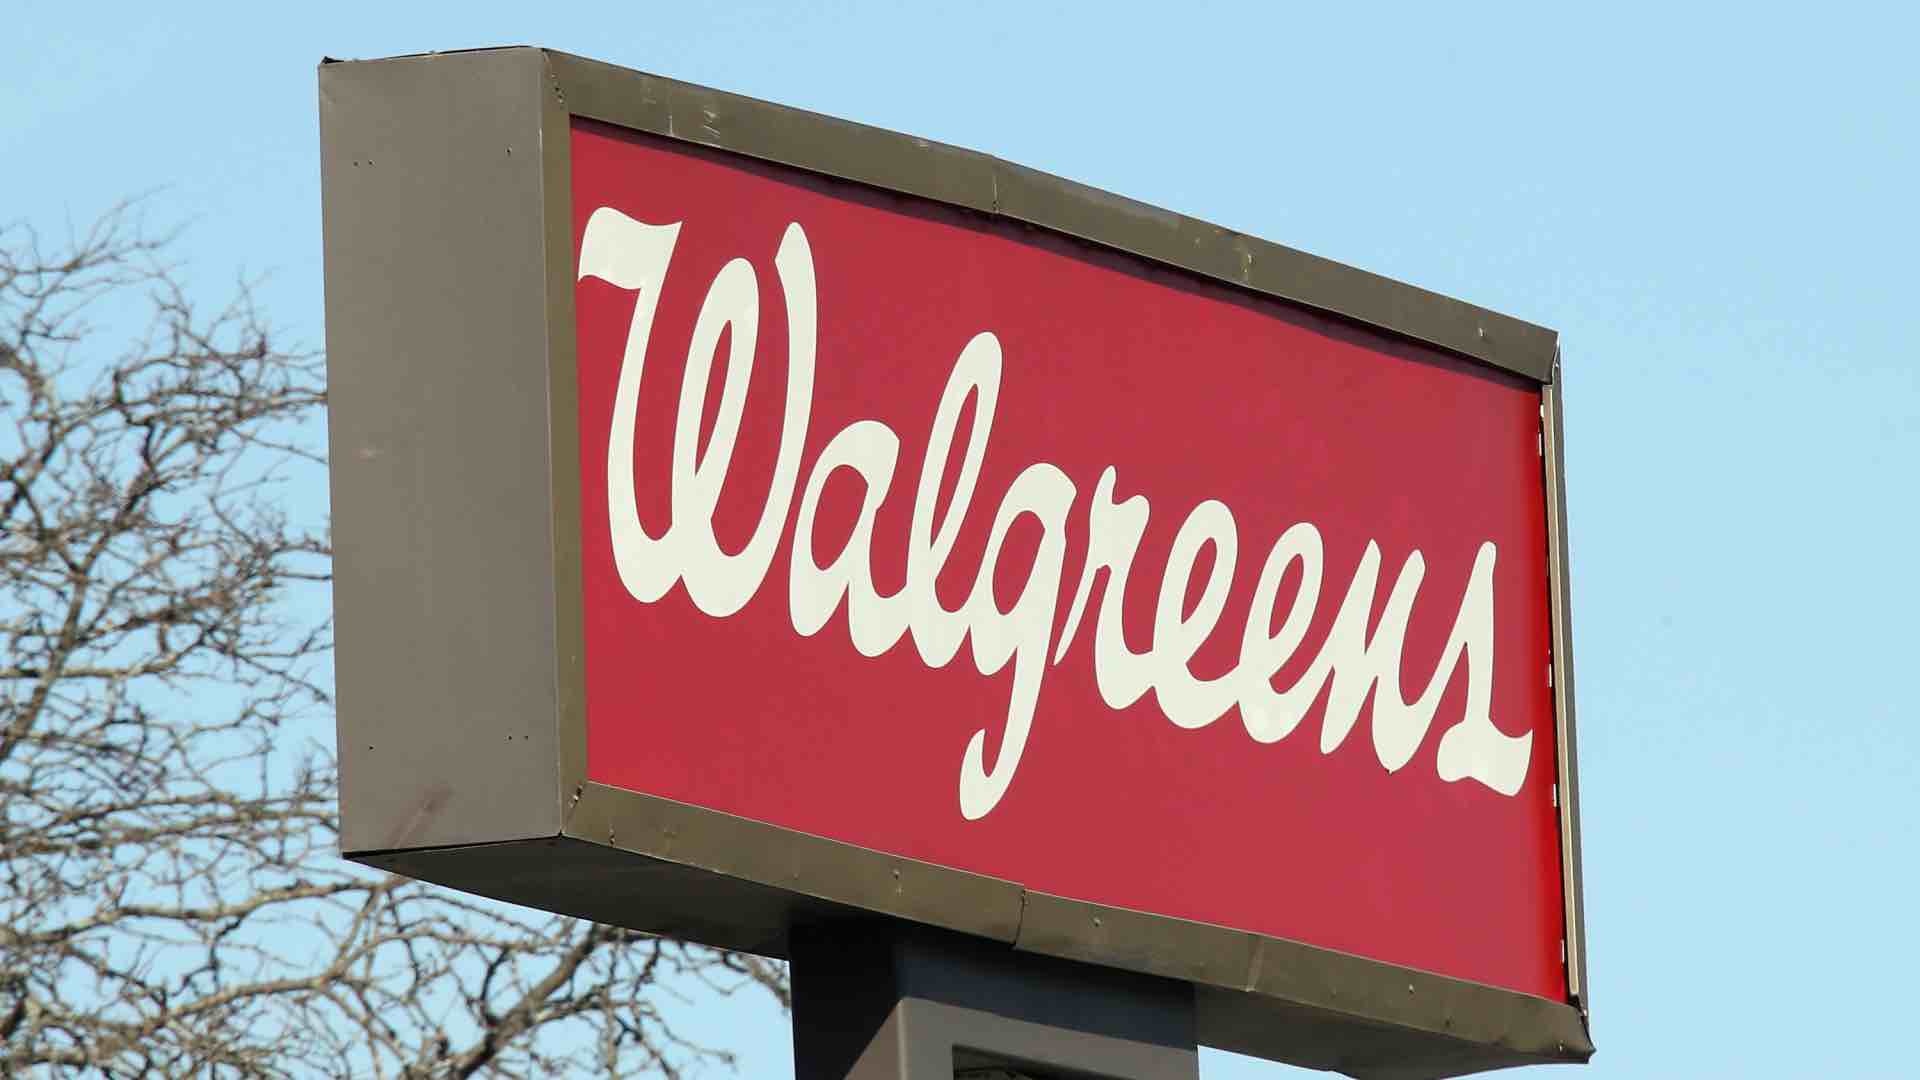 Walgreens pharmacy near me, Scheduling appointments to get the COVID